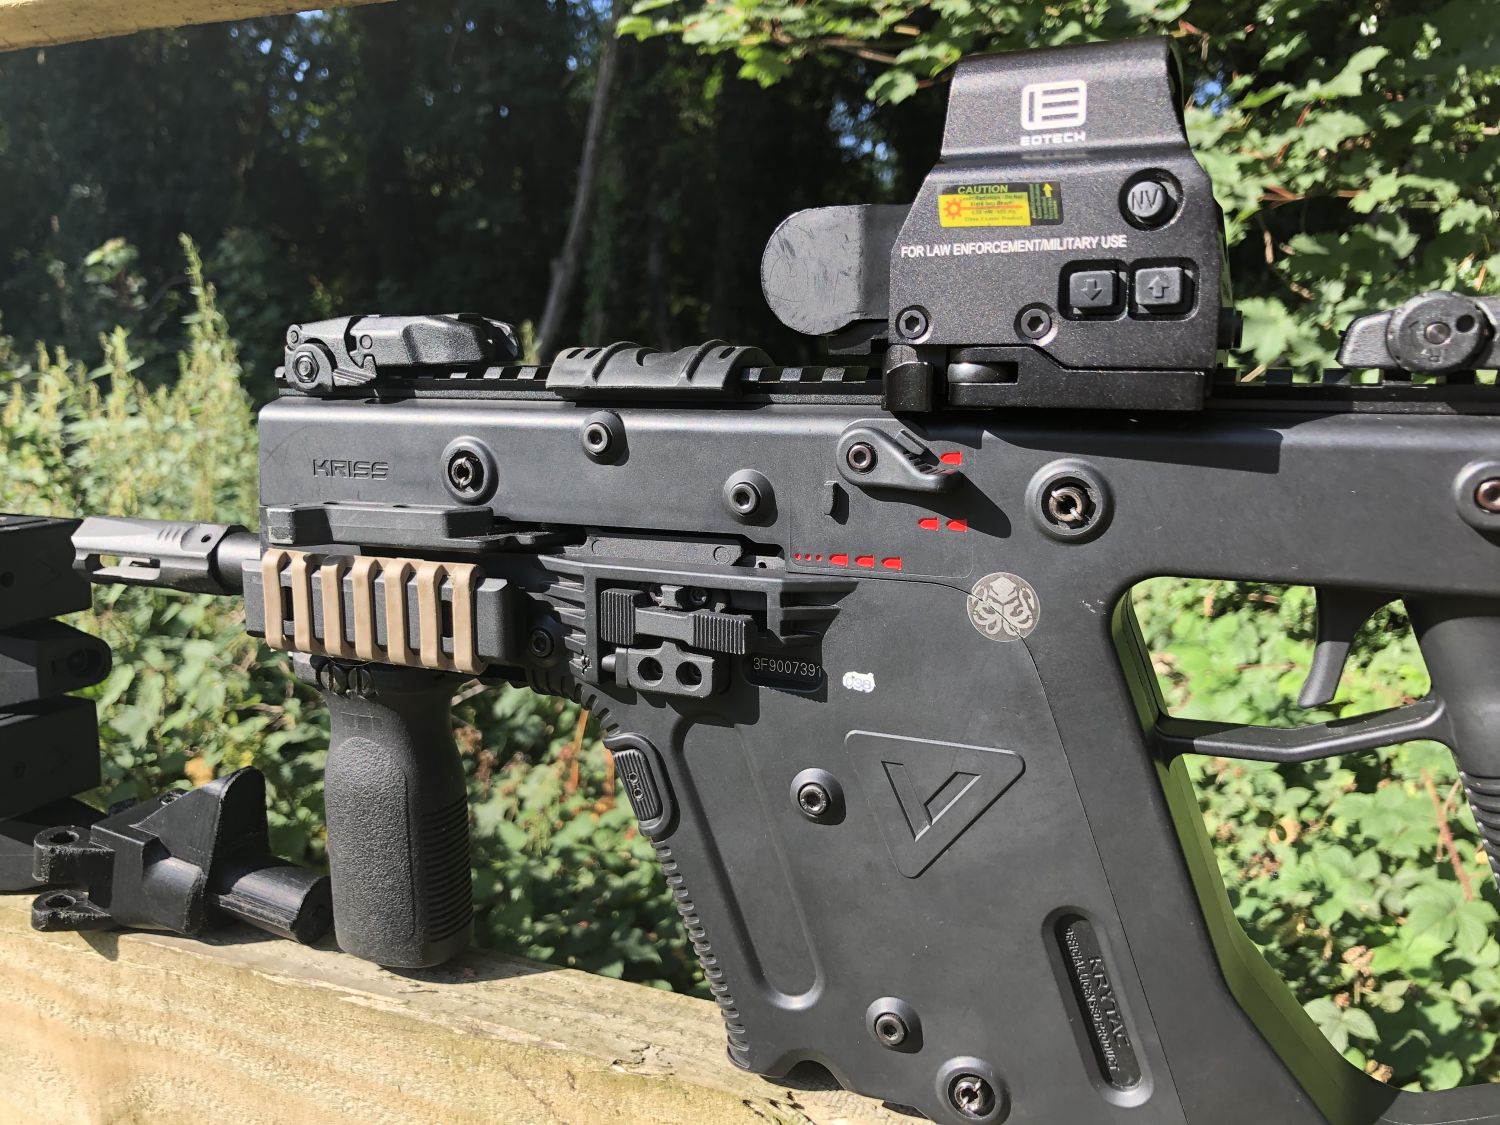 Krytac Kriss Vector with accessories - Electric Rifles - Airsoft Forums UK